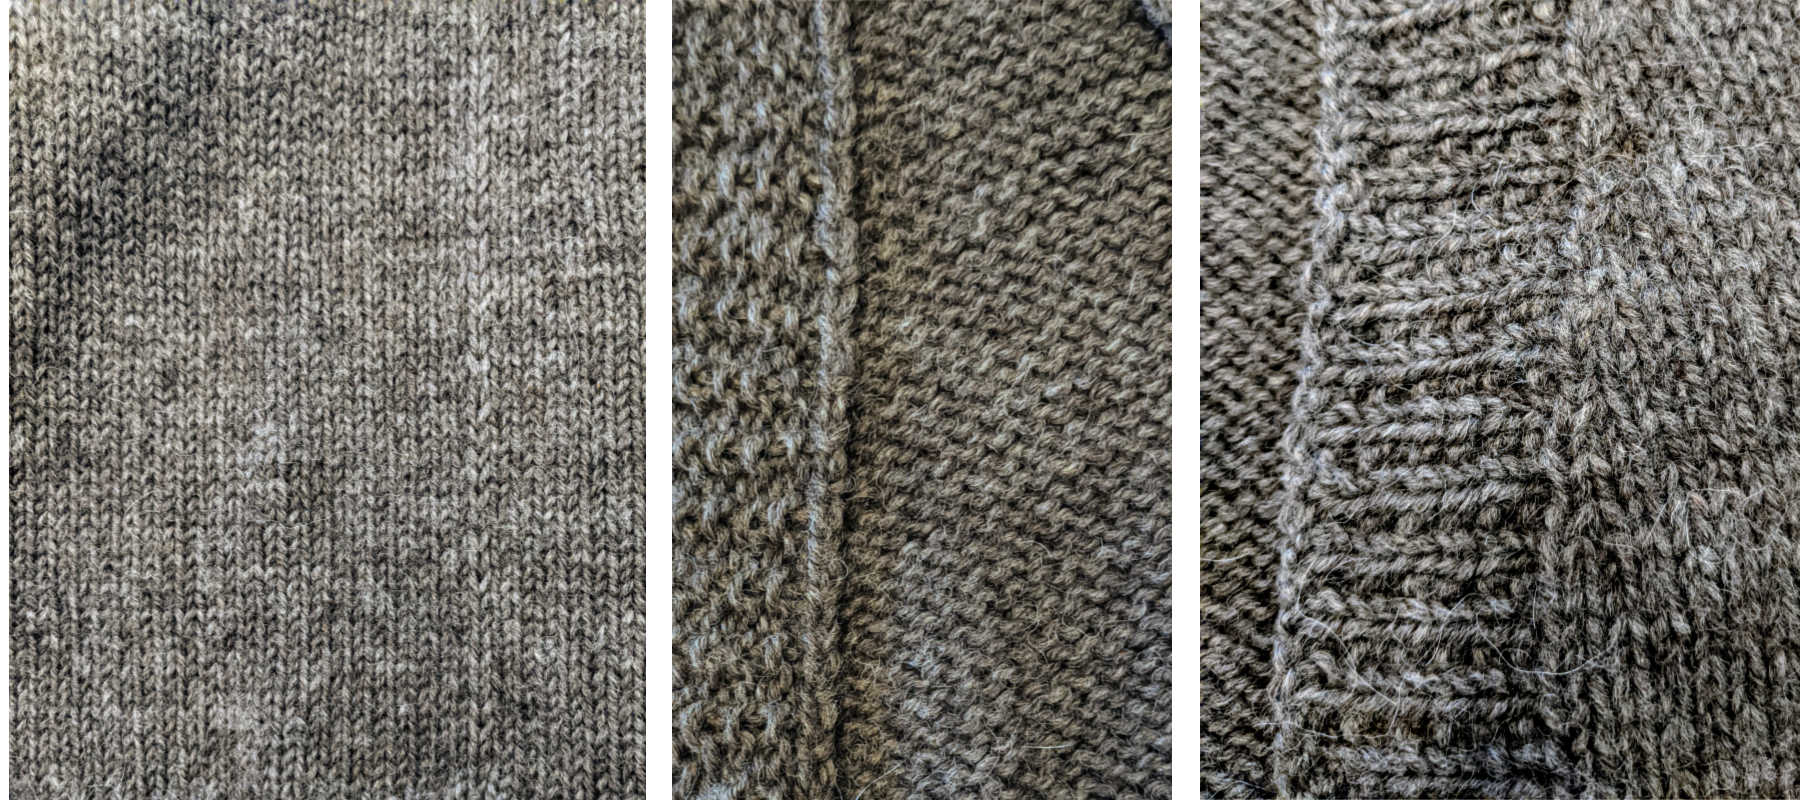 The Knitted Vest: A Perfect First Garment to Knit